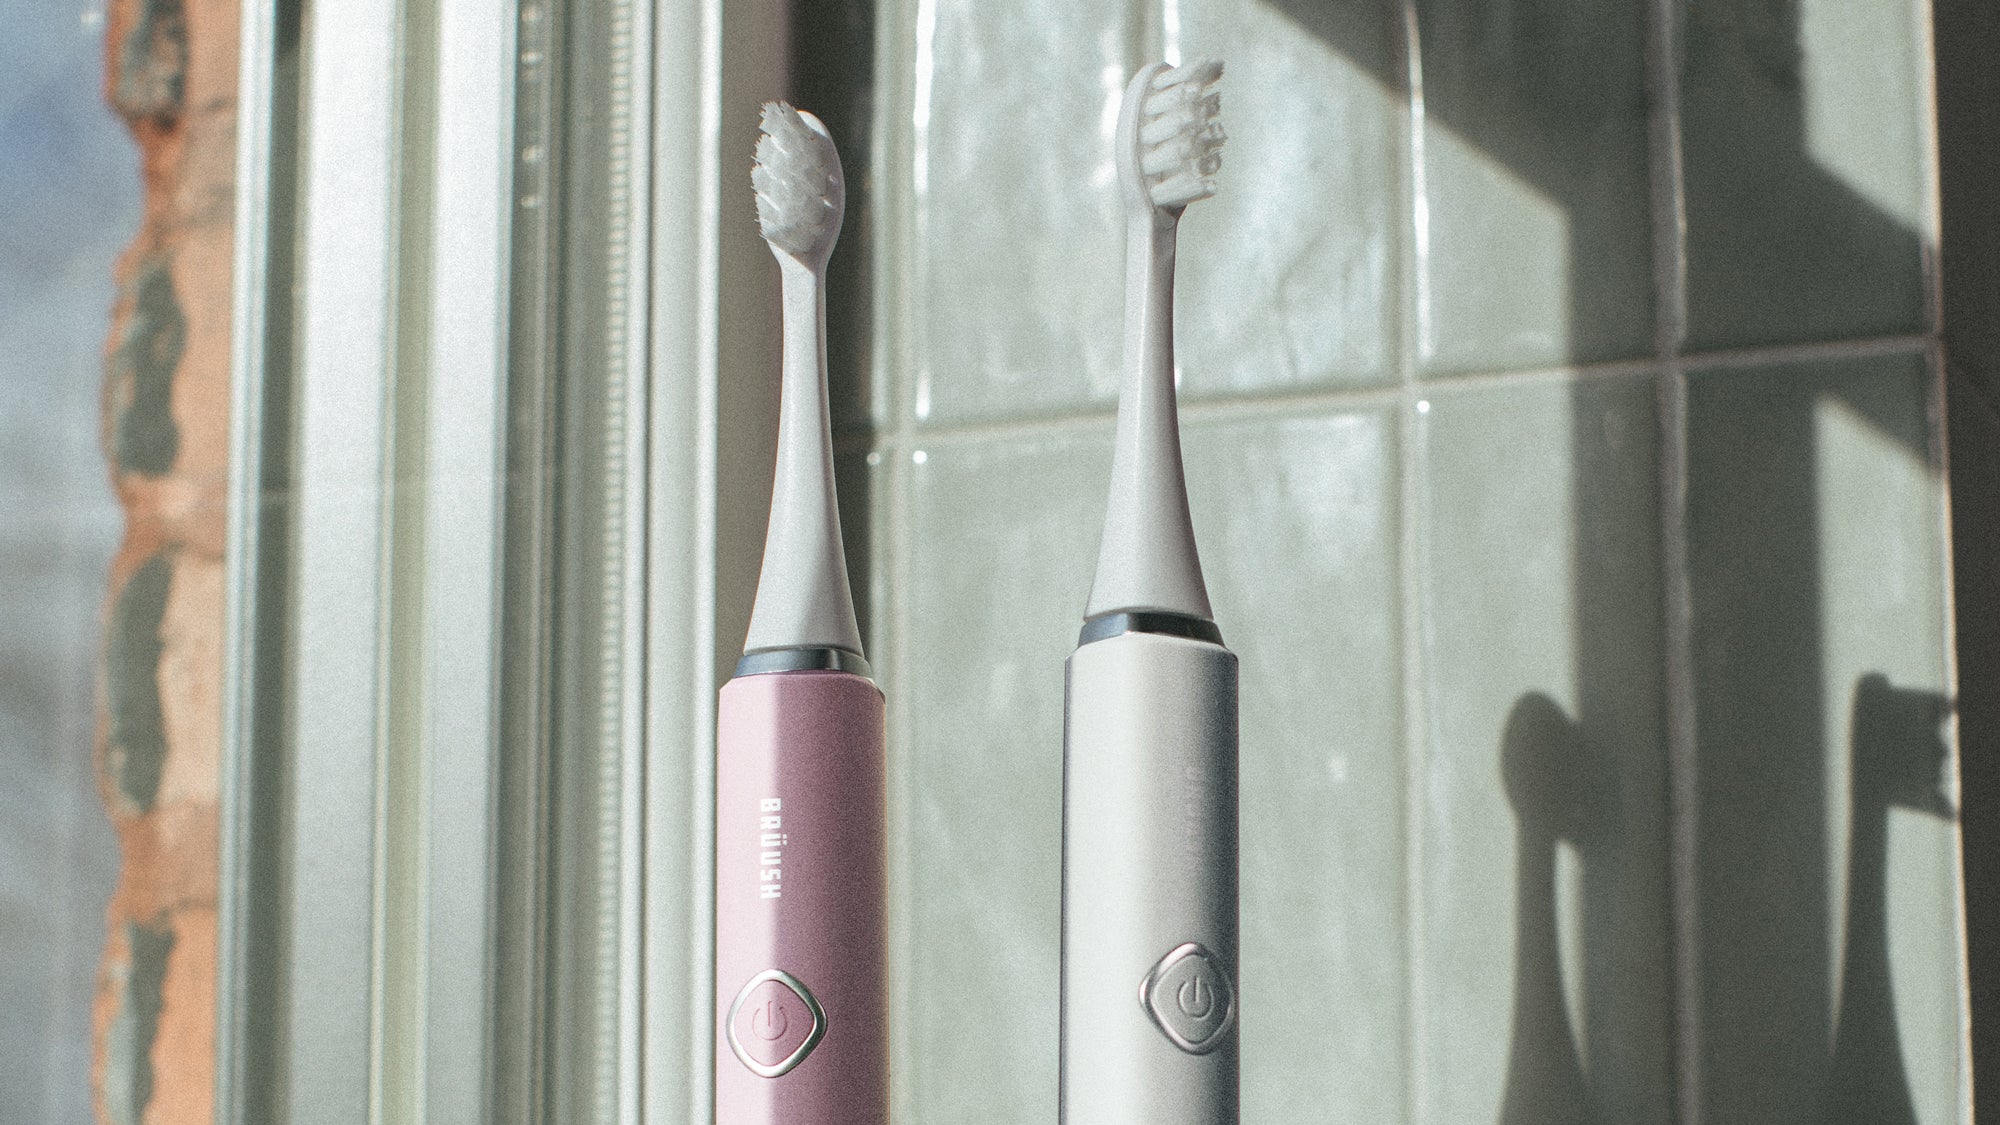 How To Clean Gunk Off An Electric Toothbrush [4 Simple Steps